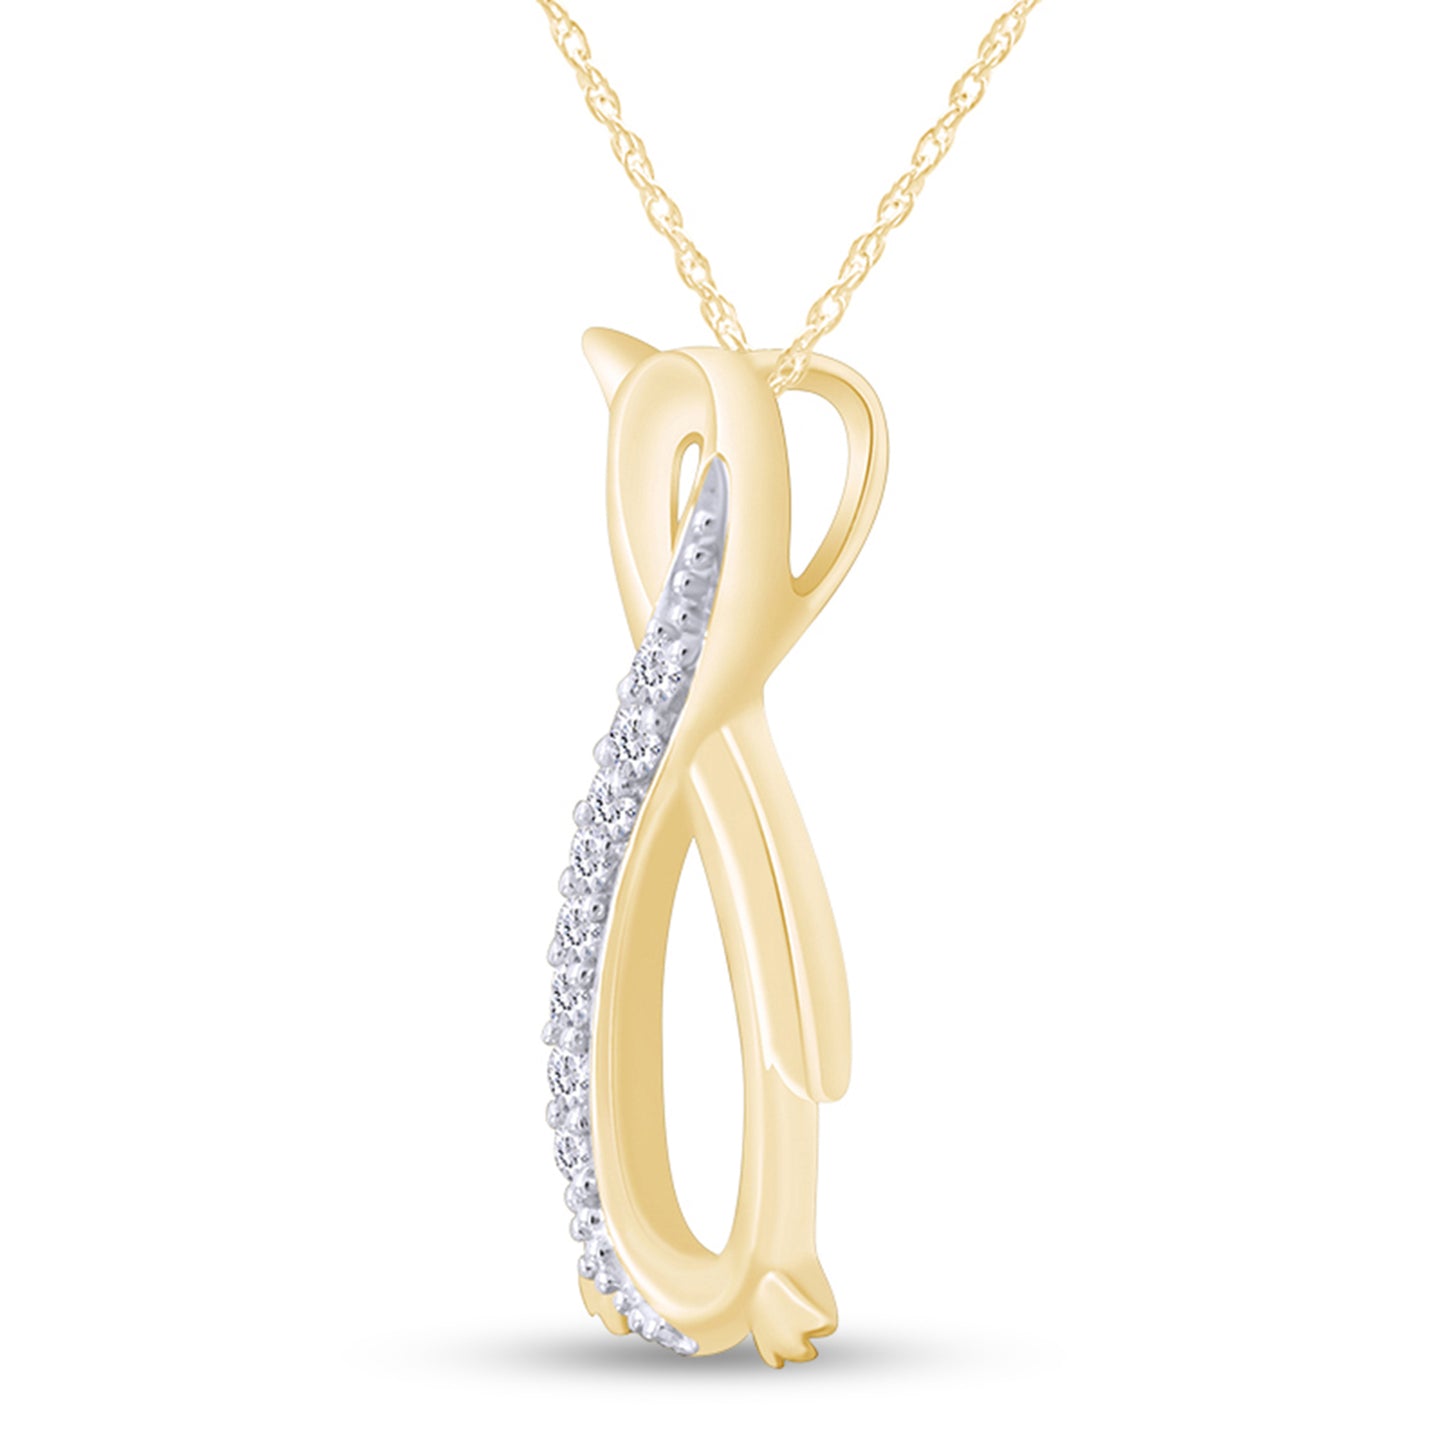 Load image into Gallery viewer, 1/10 Carat White Natural Diamond Penguin Infinity Pendant Necklace 925 Sterling Silver
